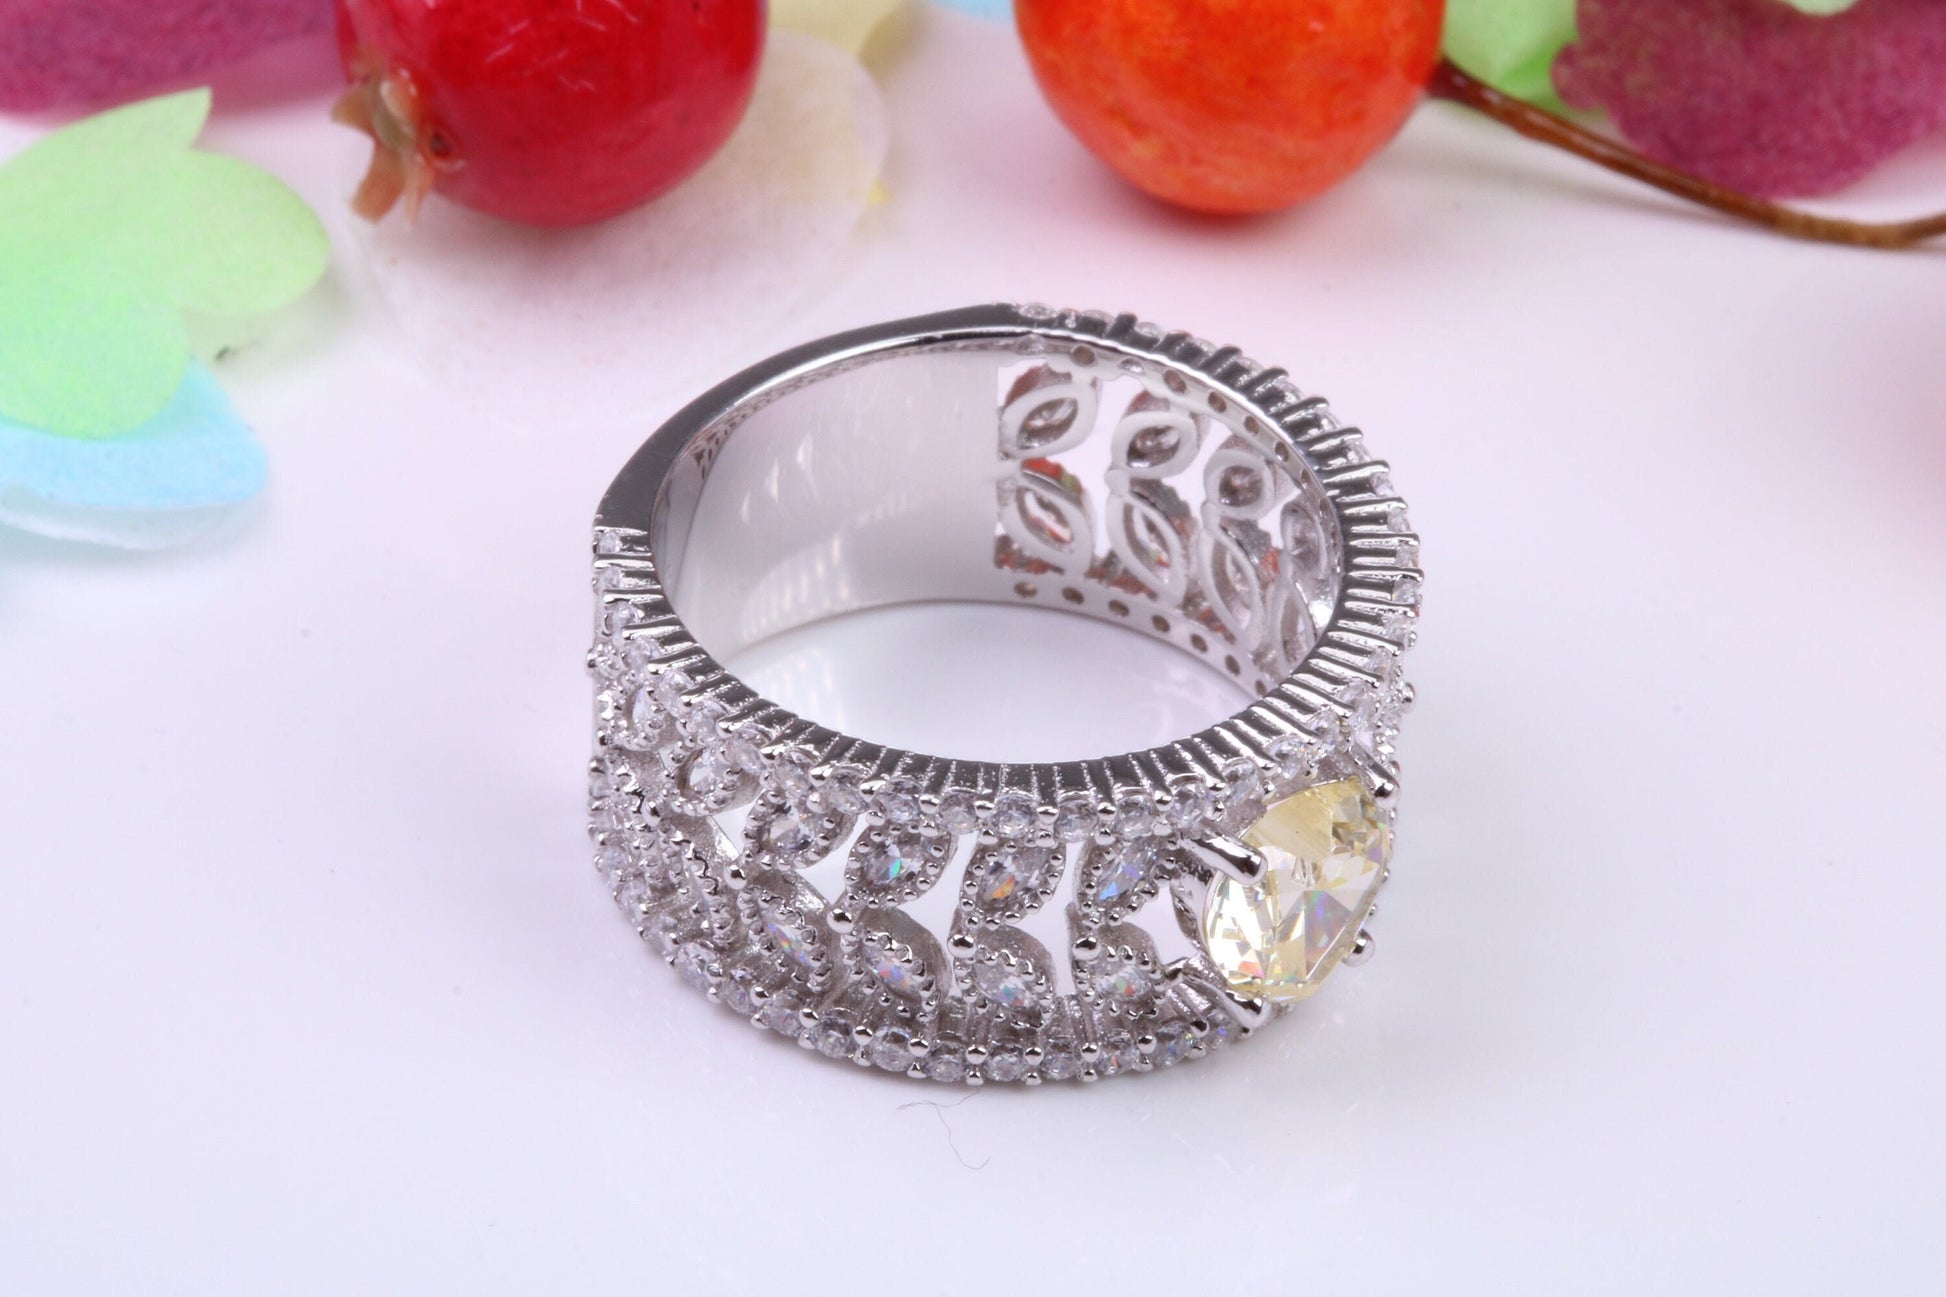 Very Dressy 10 mm wide Cubic Zirconia set Ring, Made from solid Silver